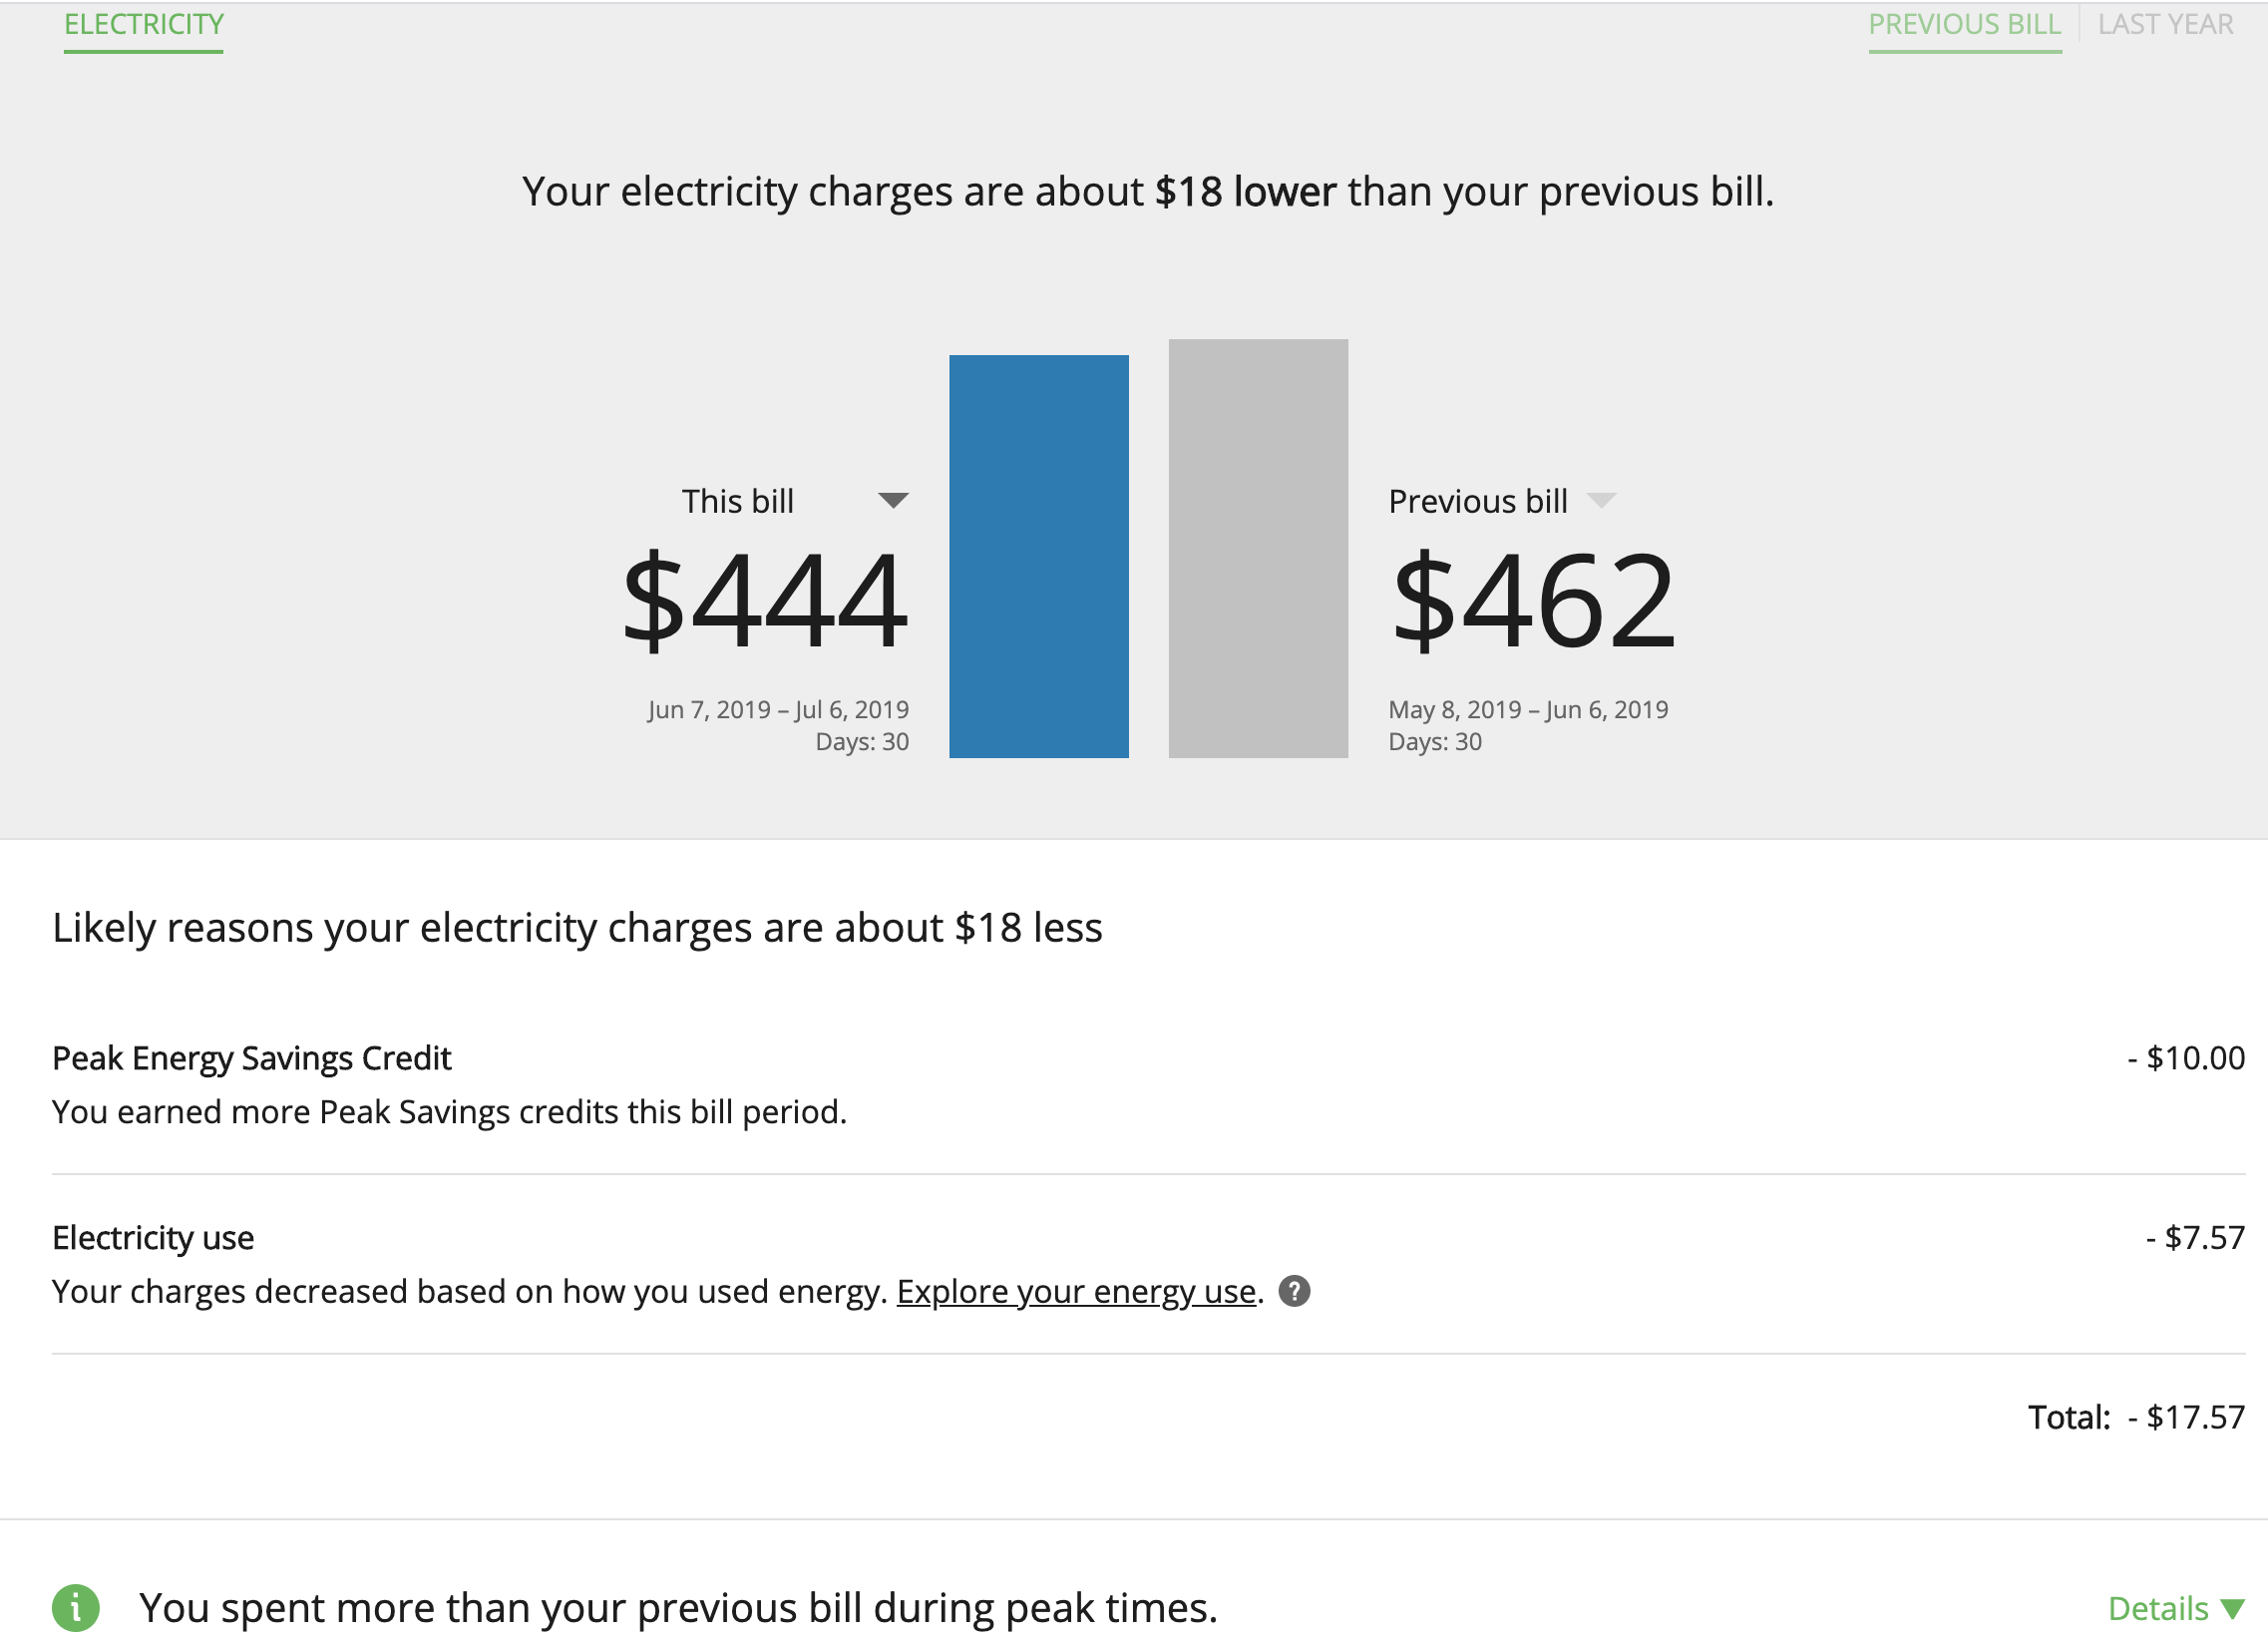 Screenshot of Bill Comparison feature showing an insight for a peak energy savings credit